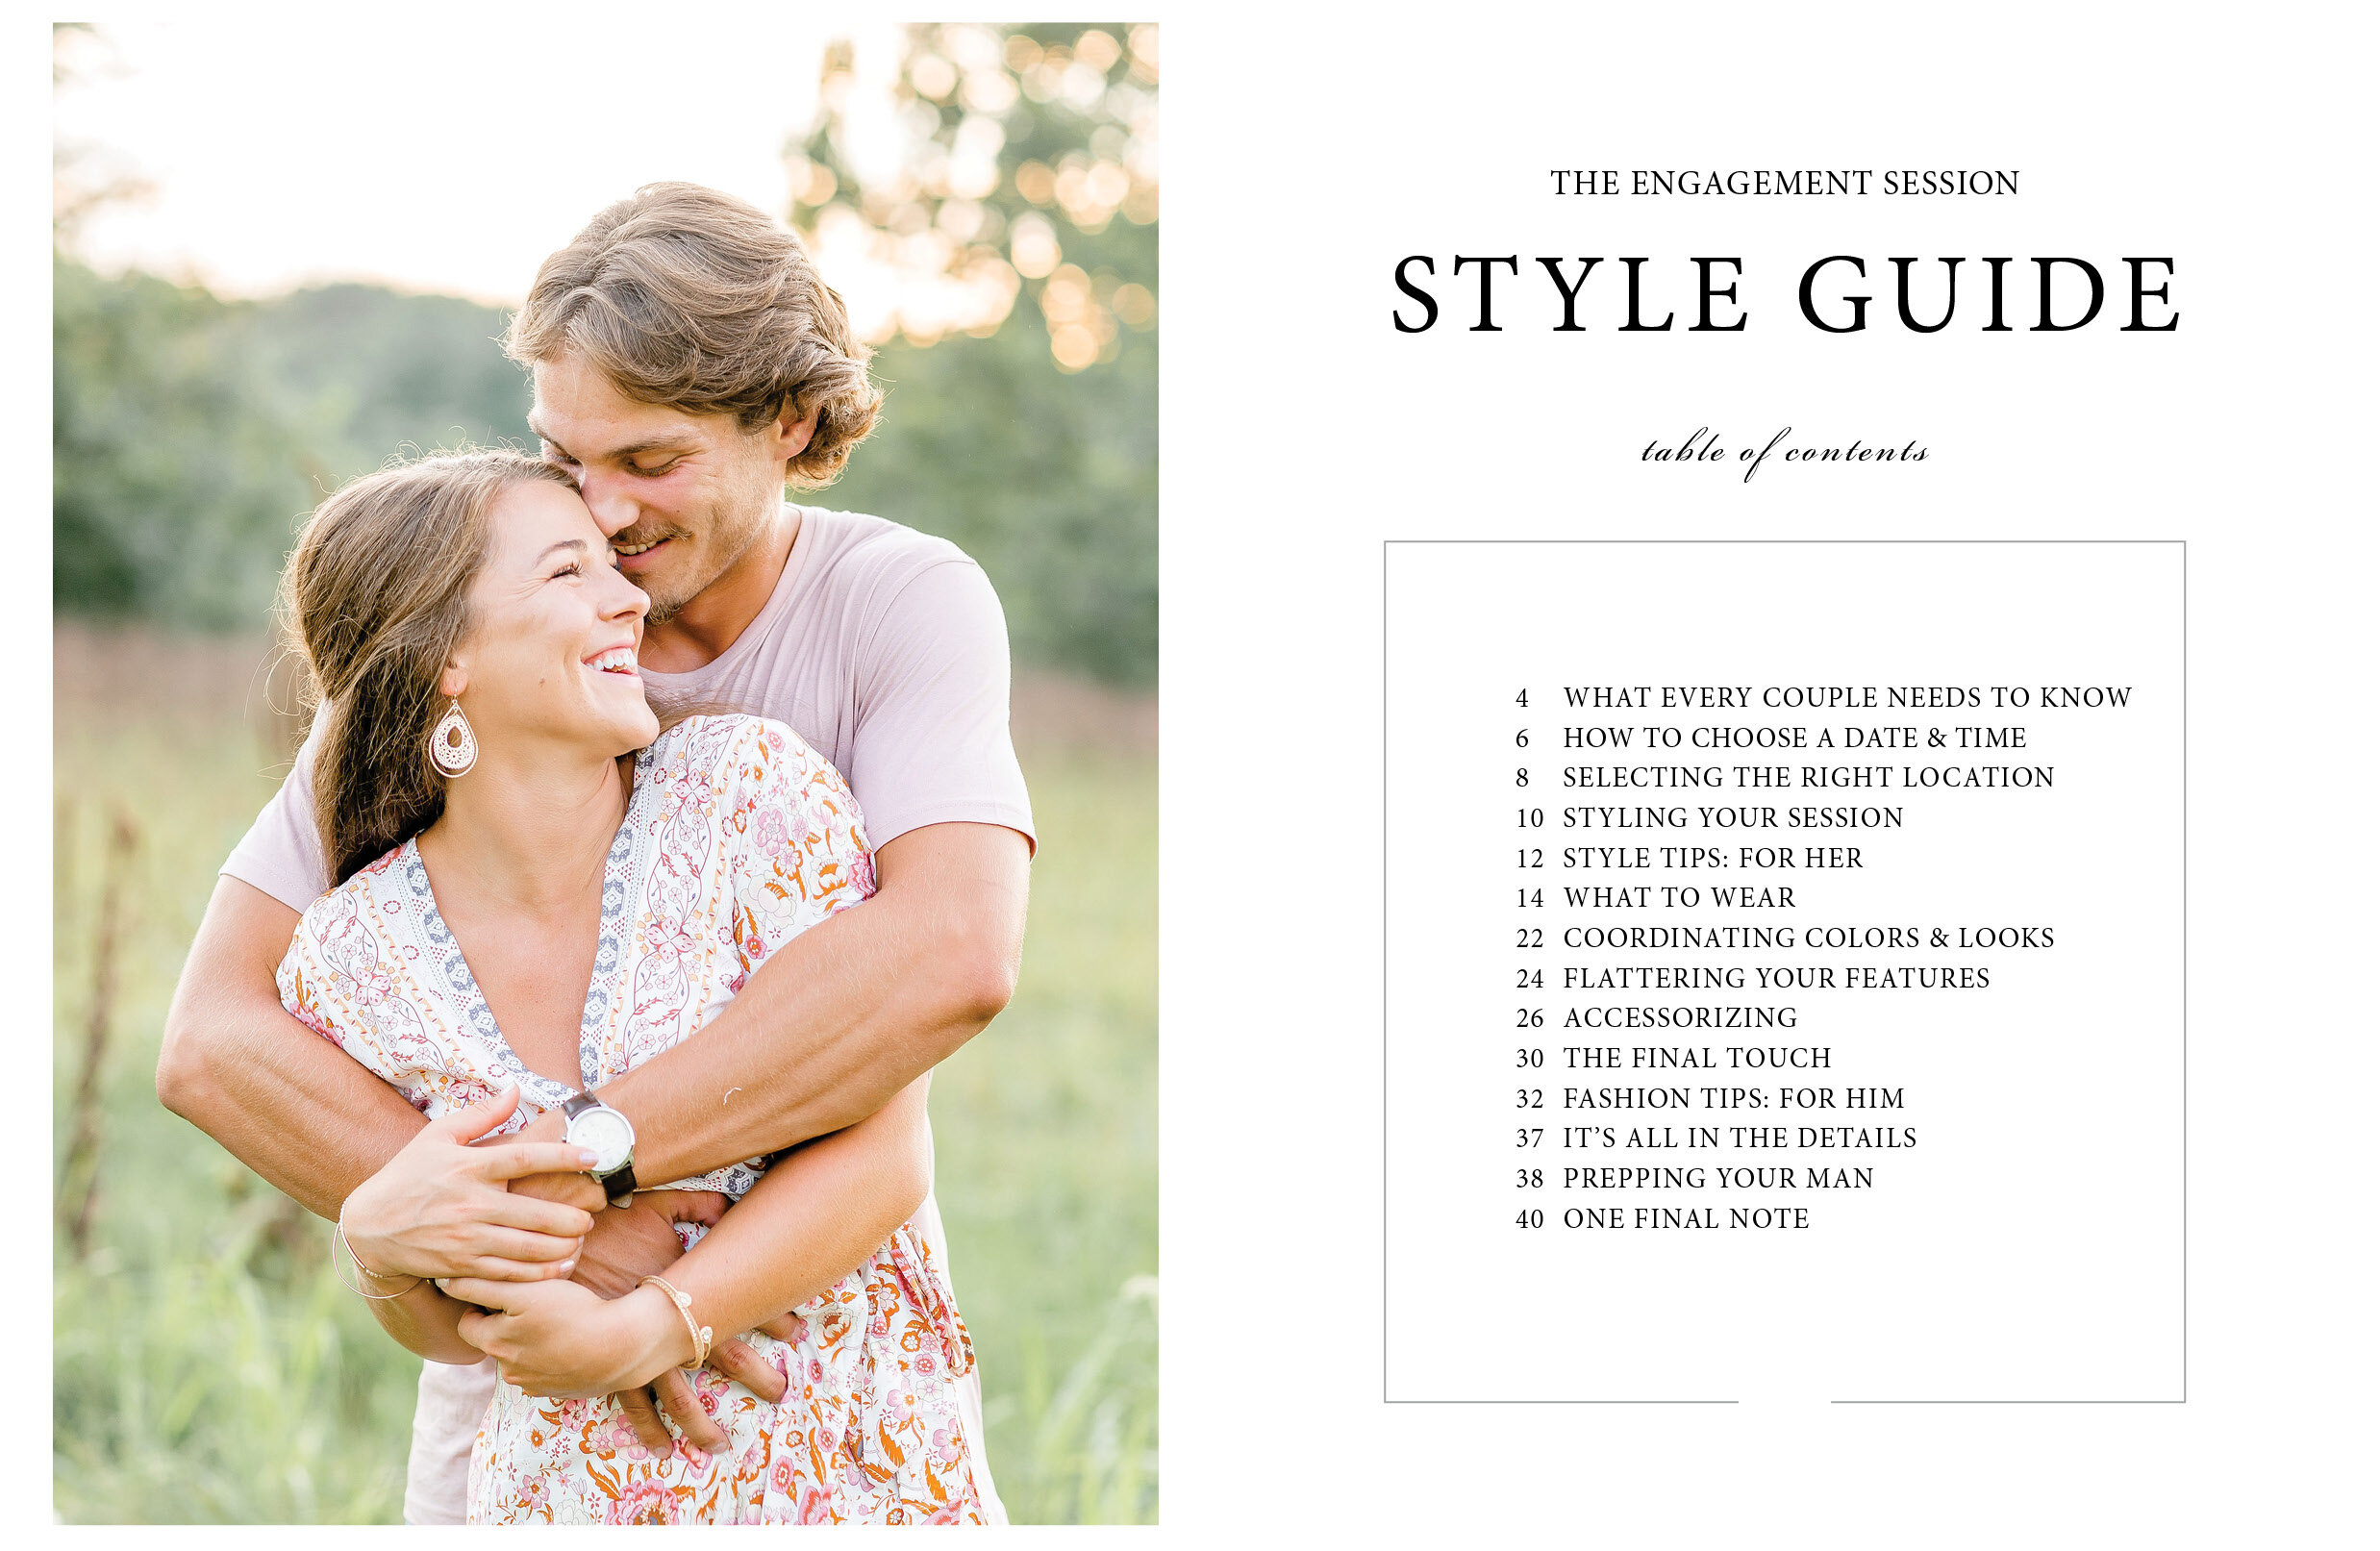 Engagement Session Style Guide2.jpg